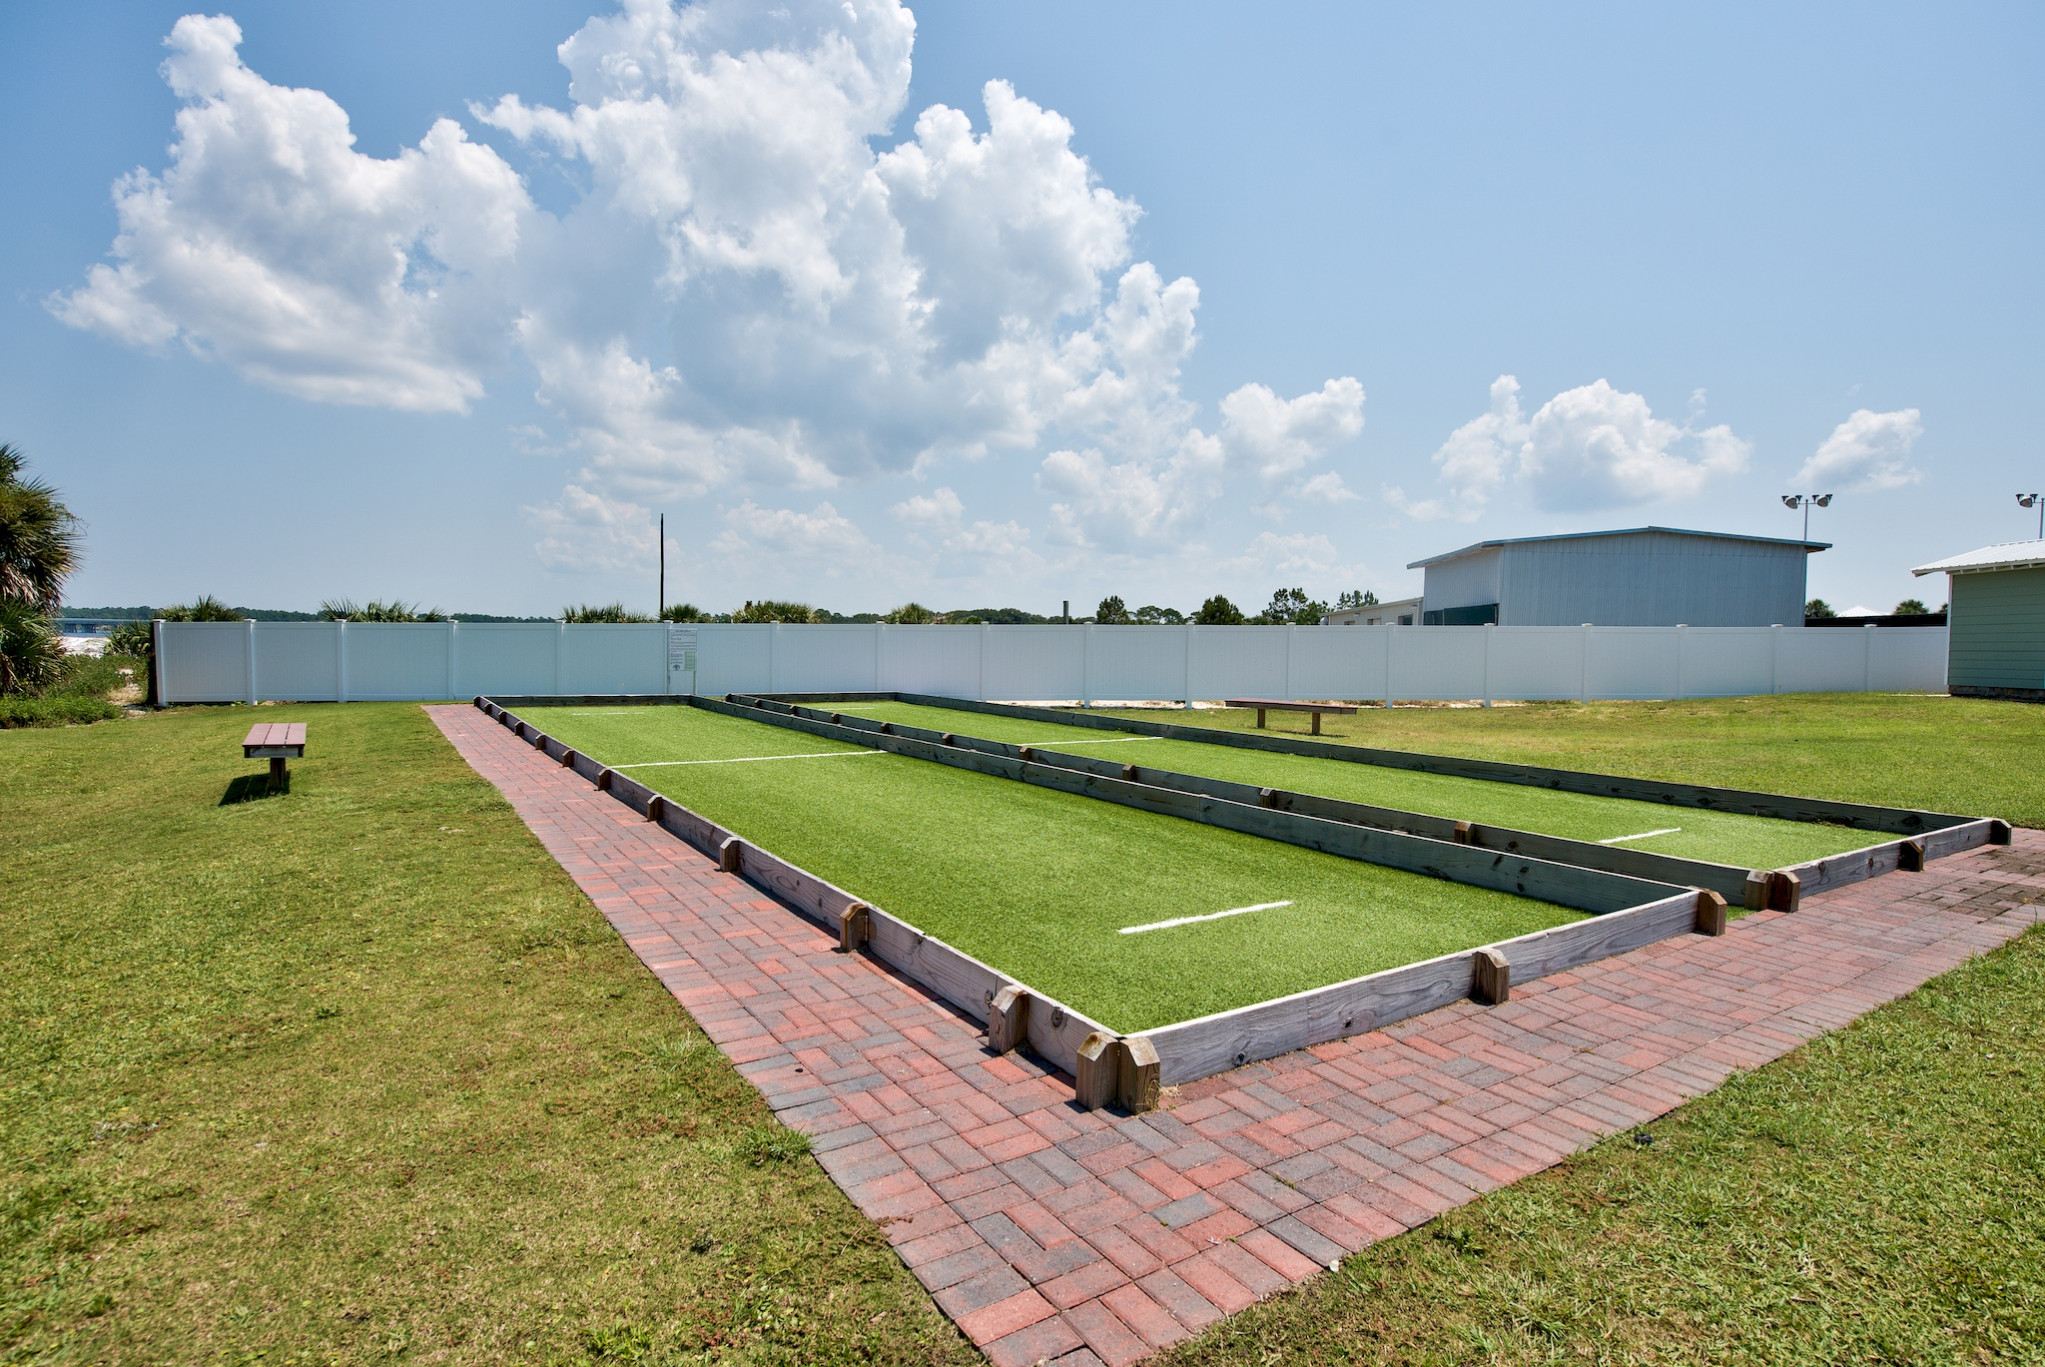 Boccee Ball Courts